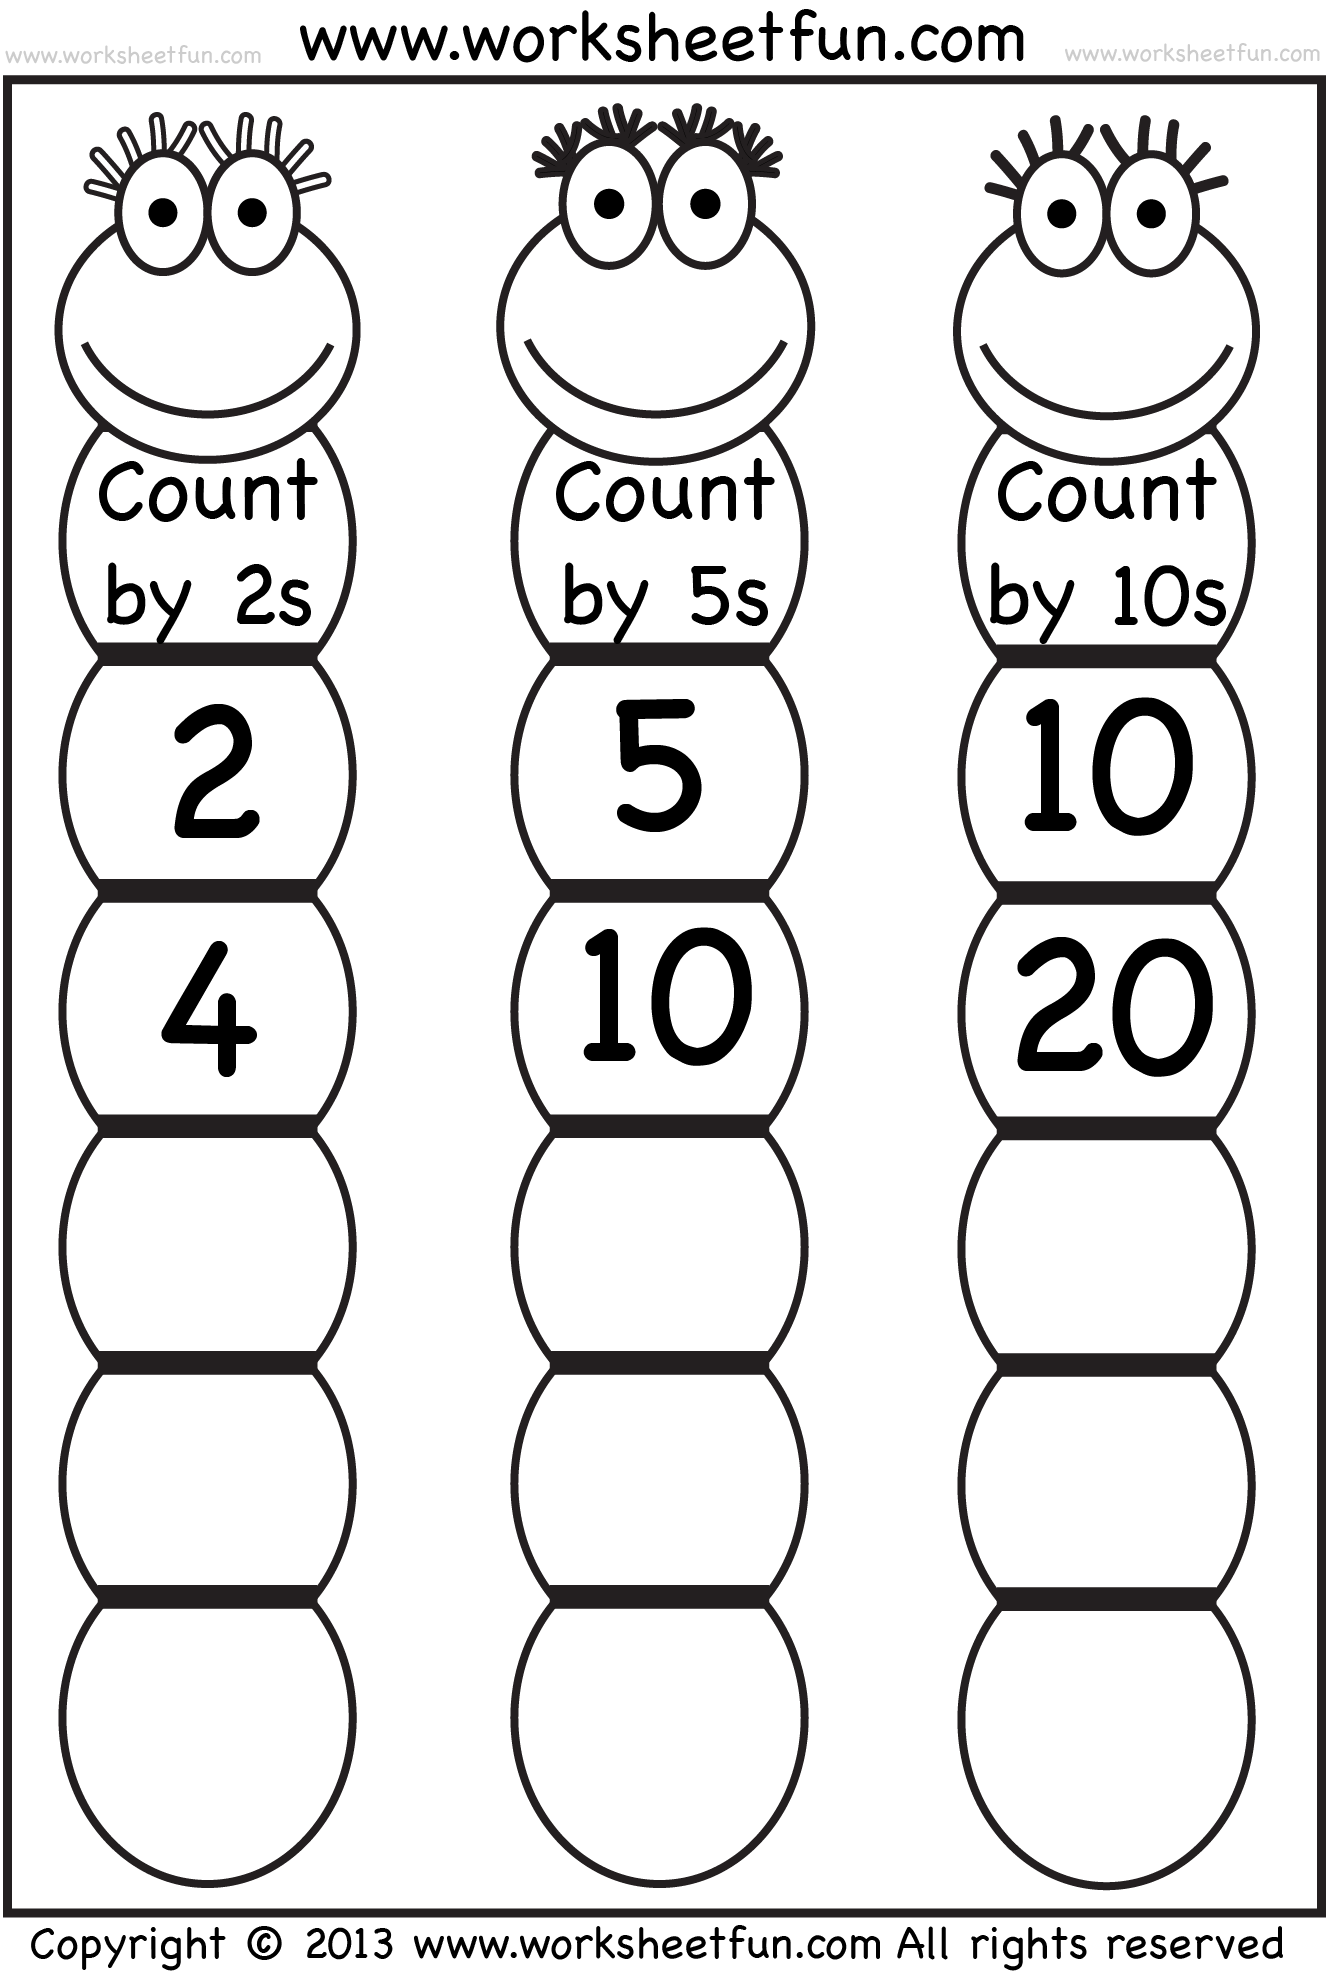 skip-counting-by-3-worksheet